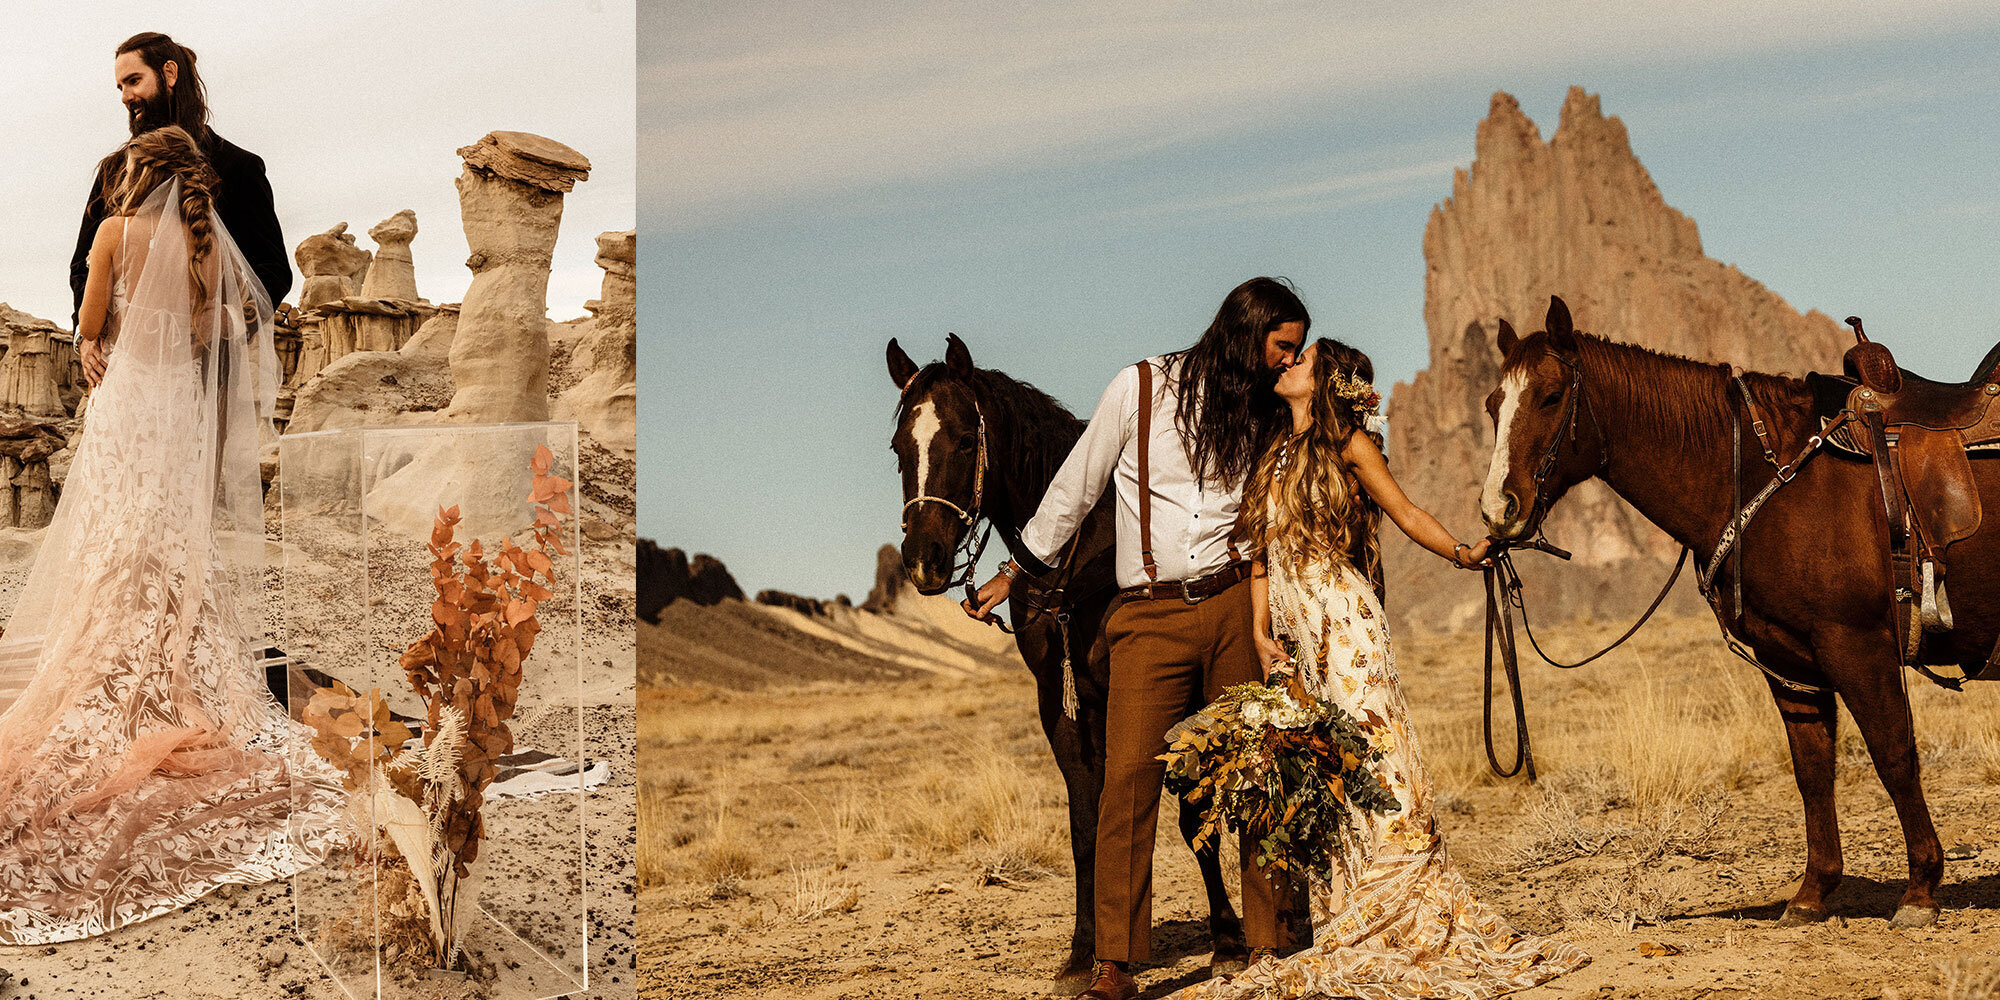 New Mexico Adventure Elopement at Shiprock, NM